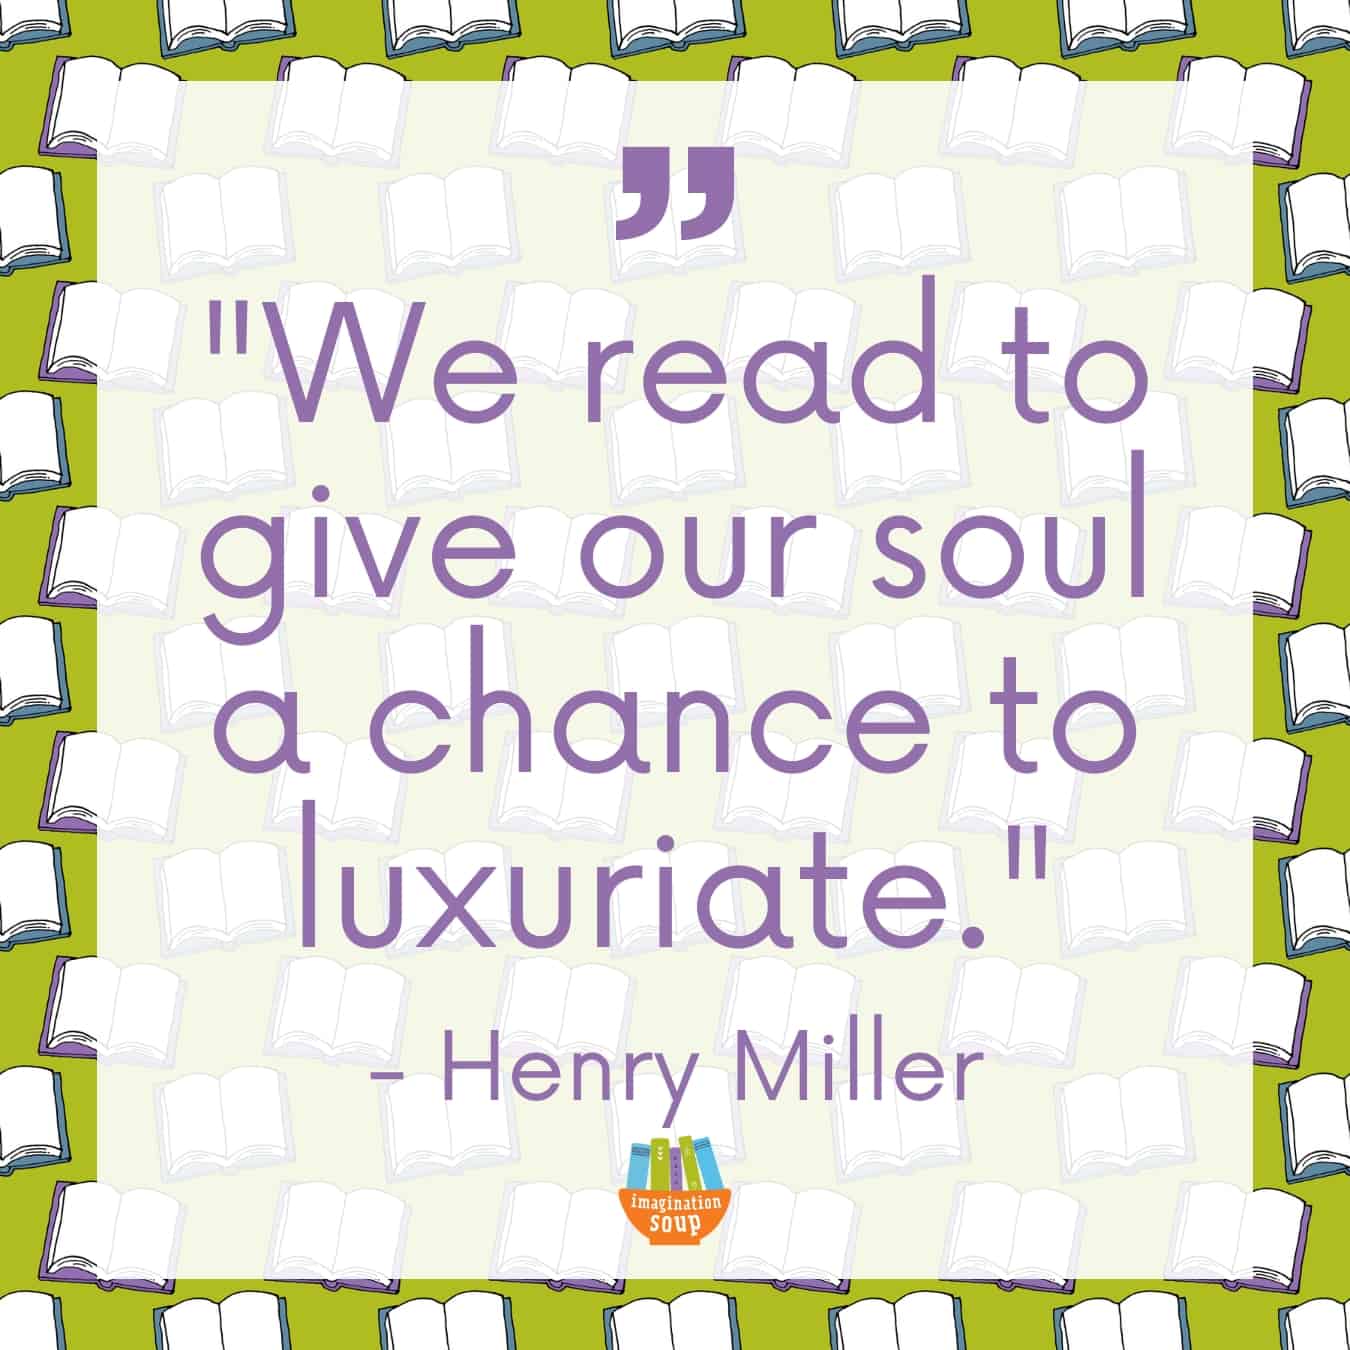 Henry Miller reading quote